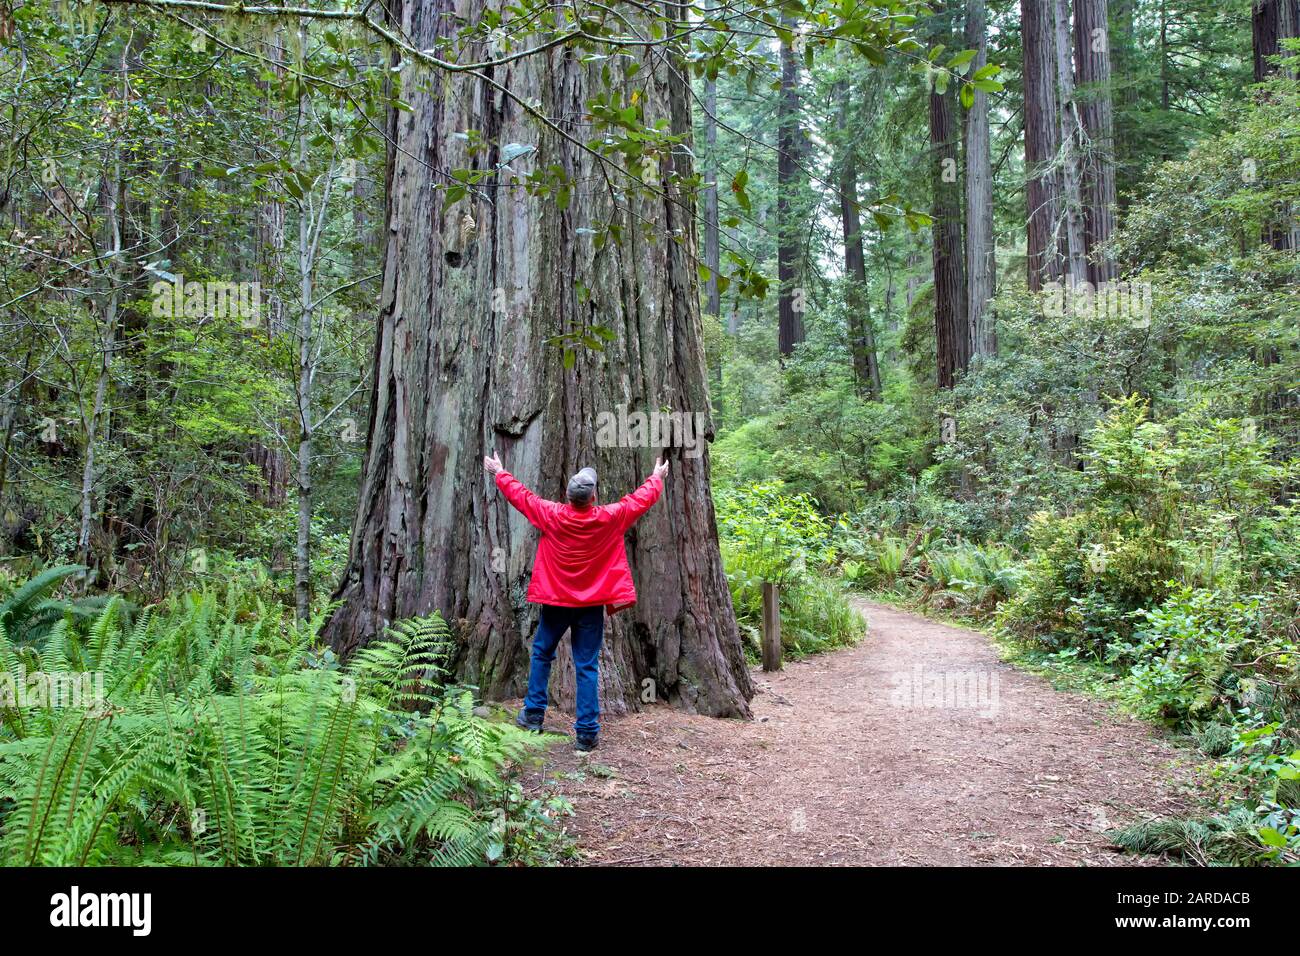 Senior male, raised arms, communicating with Ancient Redwood tree 'Sequoia simpervirens',  Western Sword Ferns  'Polystichum munitum' , forest trail. . Stock Photo